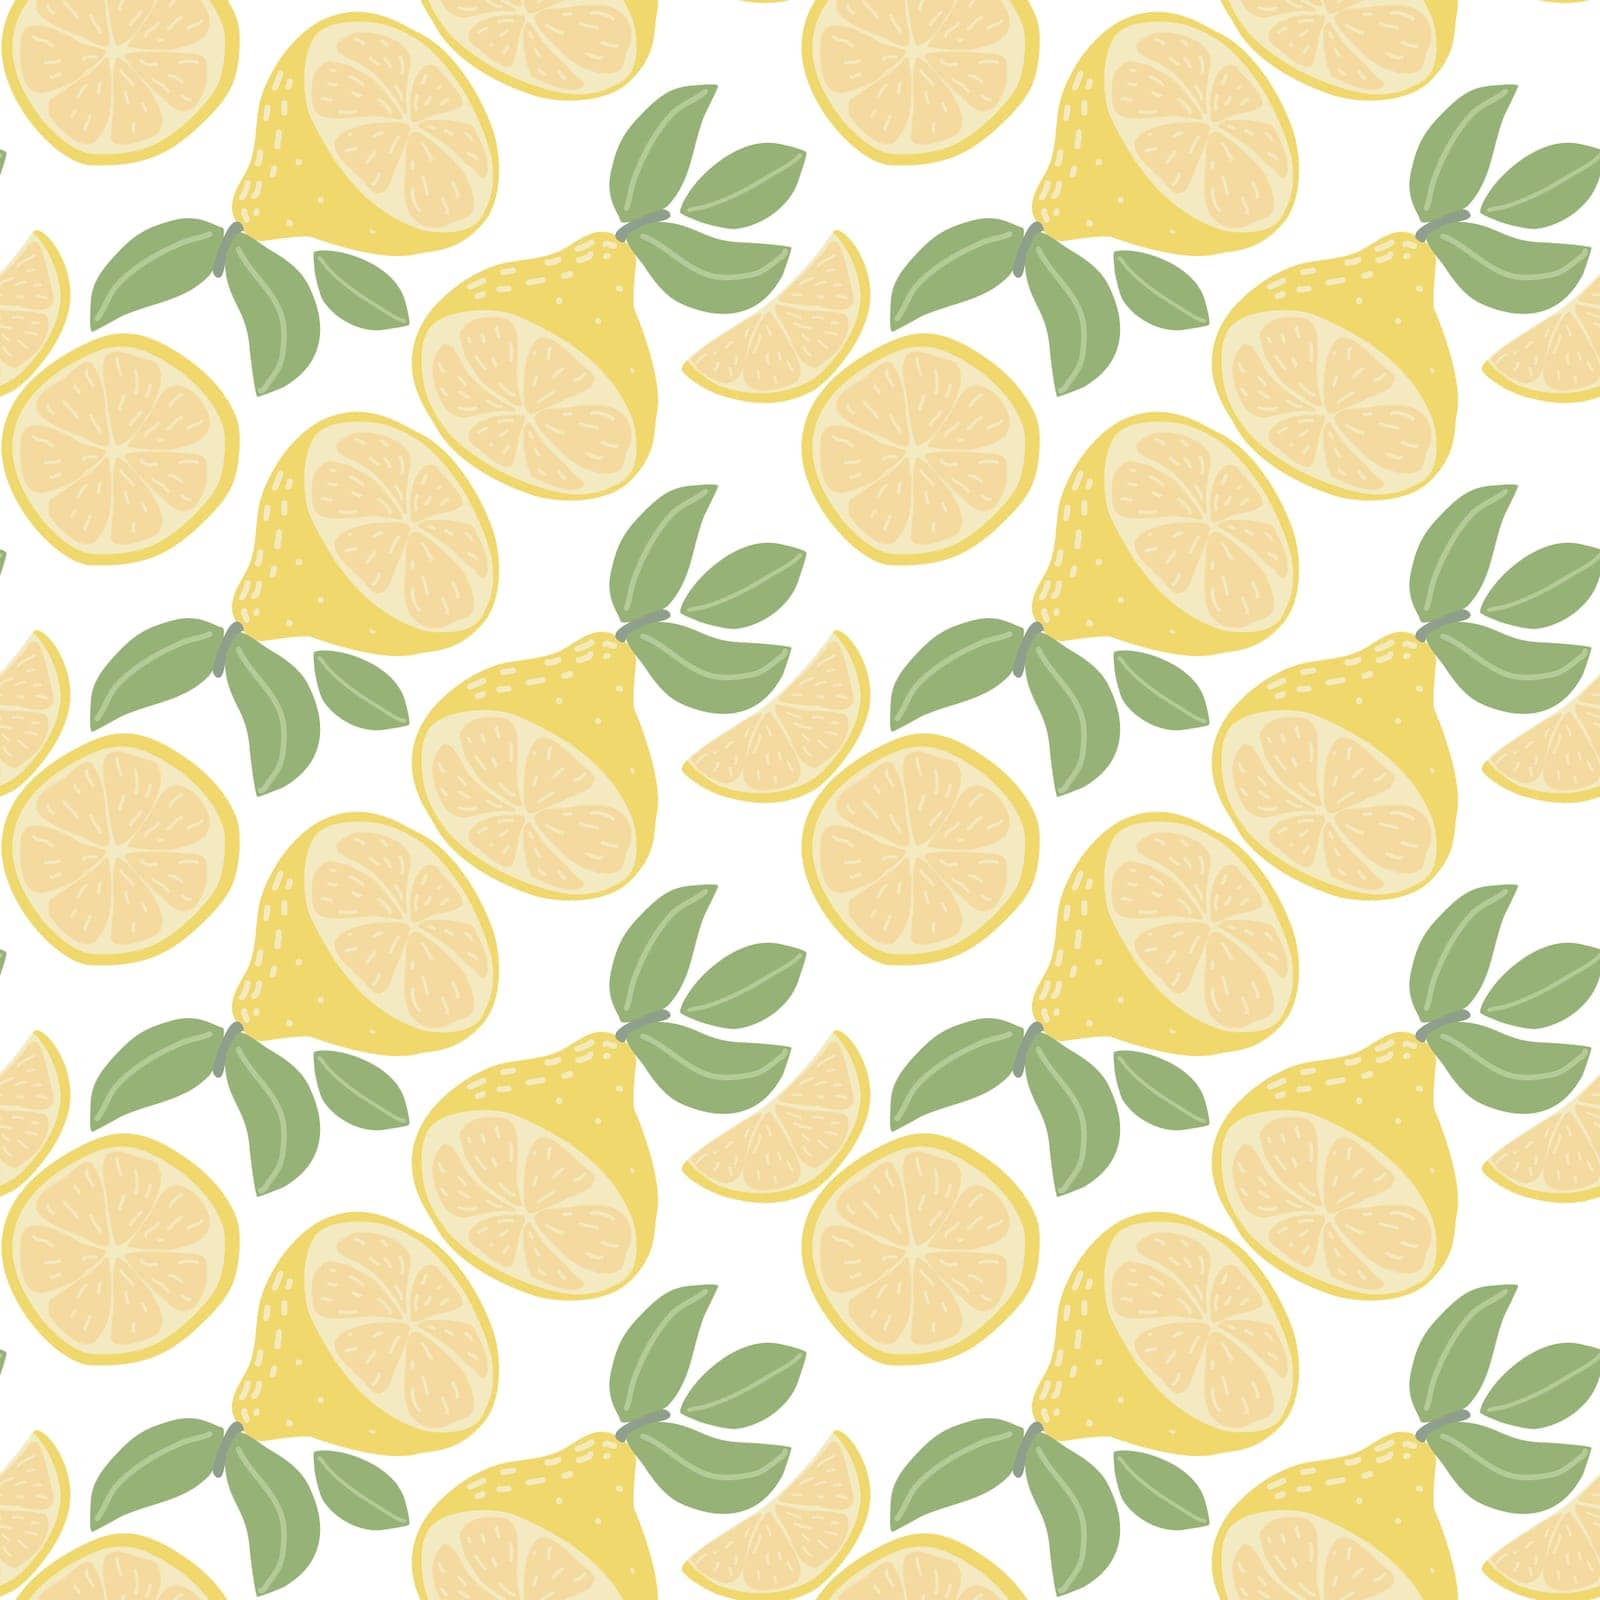 Botanical citrus seamless pattern vector illustration. Lemons and foliage background. Exotic fruit yellow print for textile, packaging, design